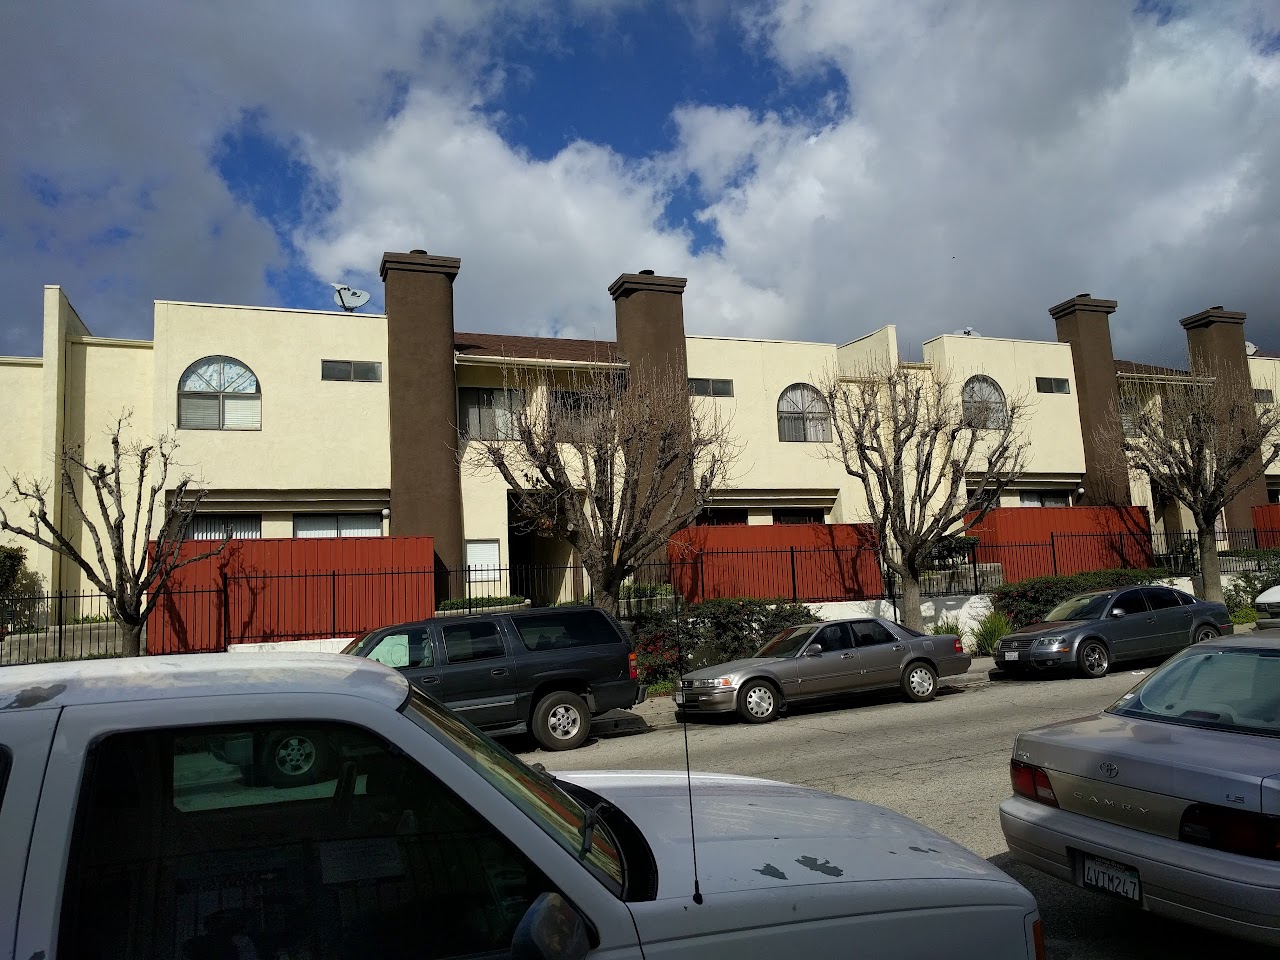 Photo of MOUNTAIN VIEW MANOR APTS at 12960 DRONFIELD AVE SYLMAR, CA 91342